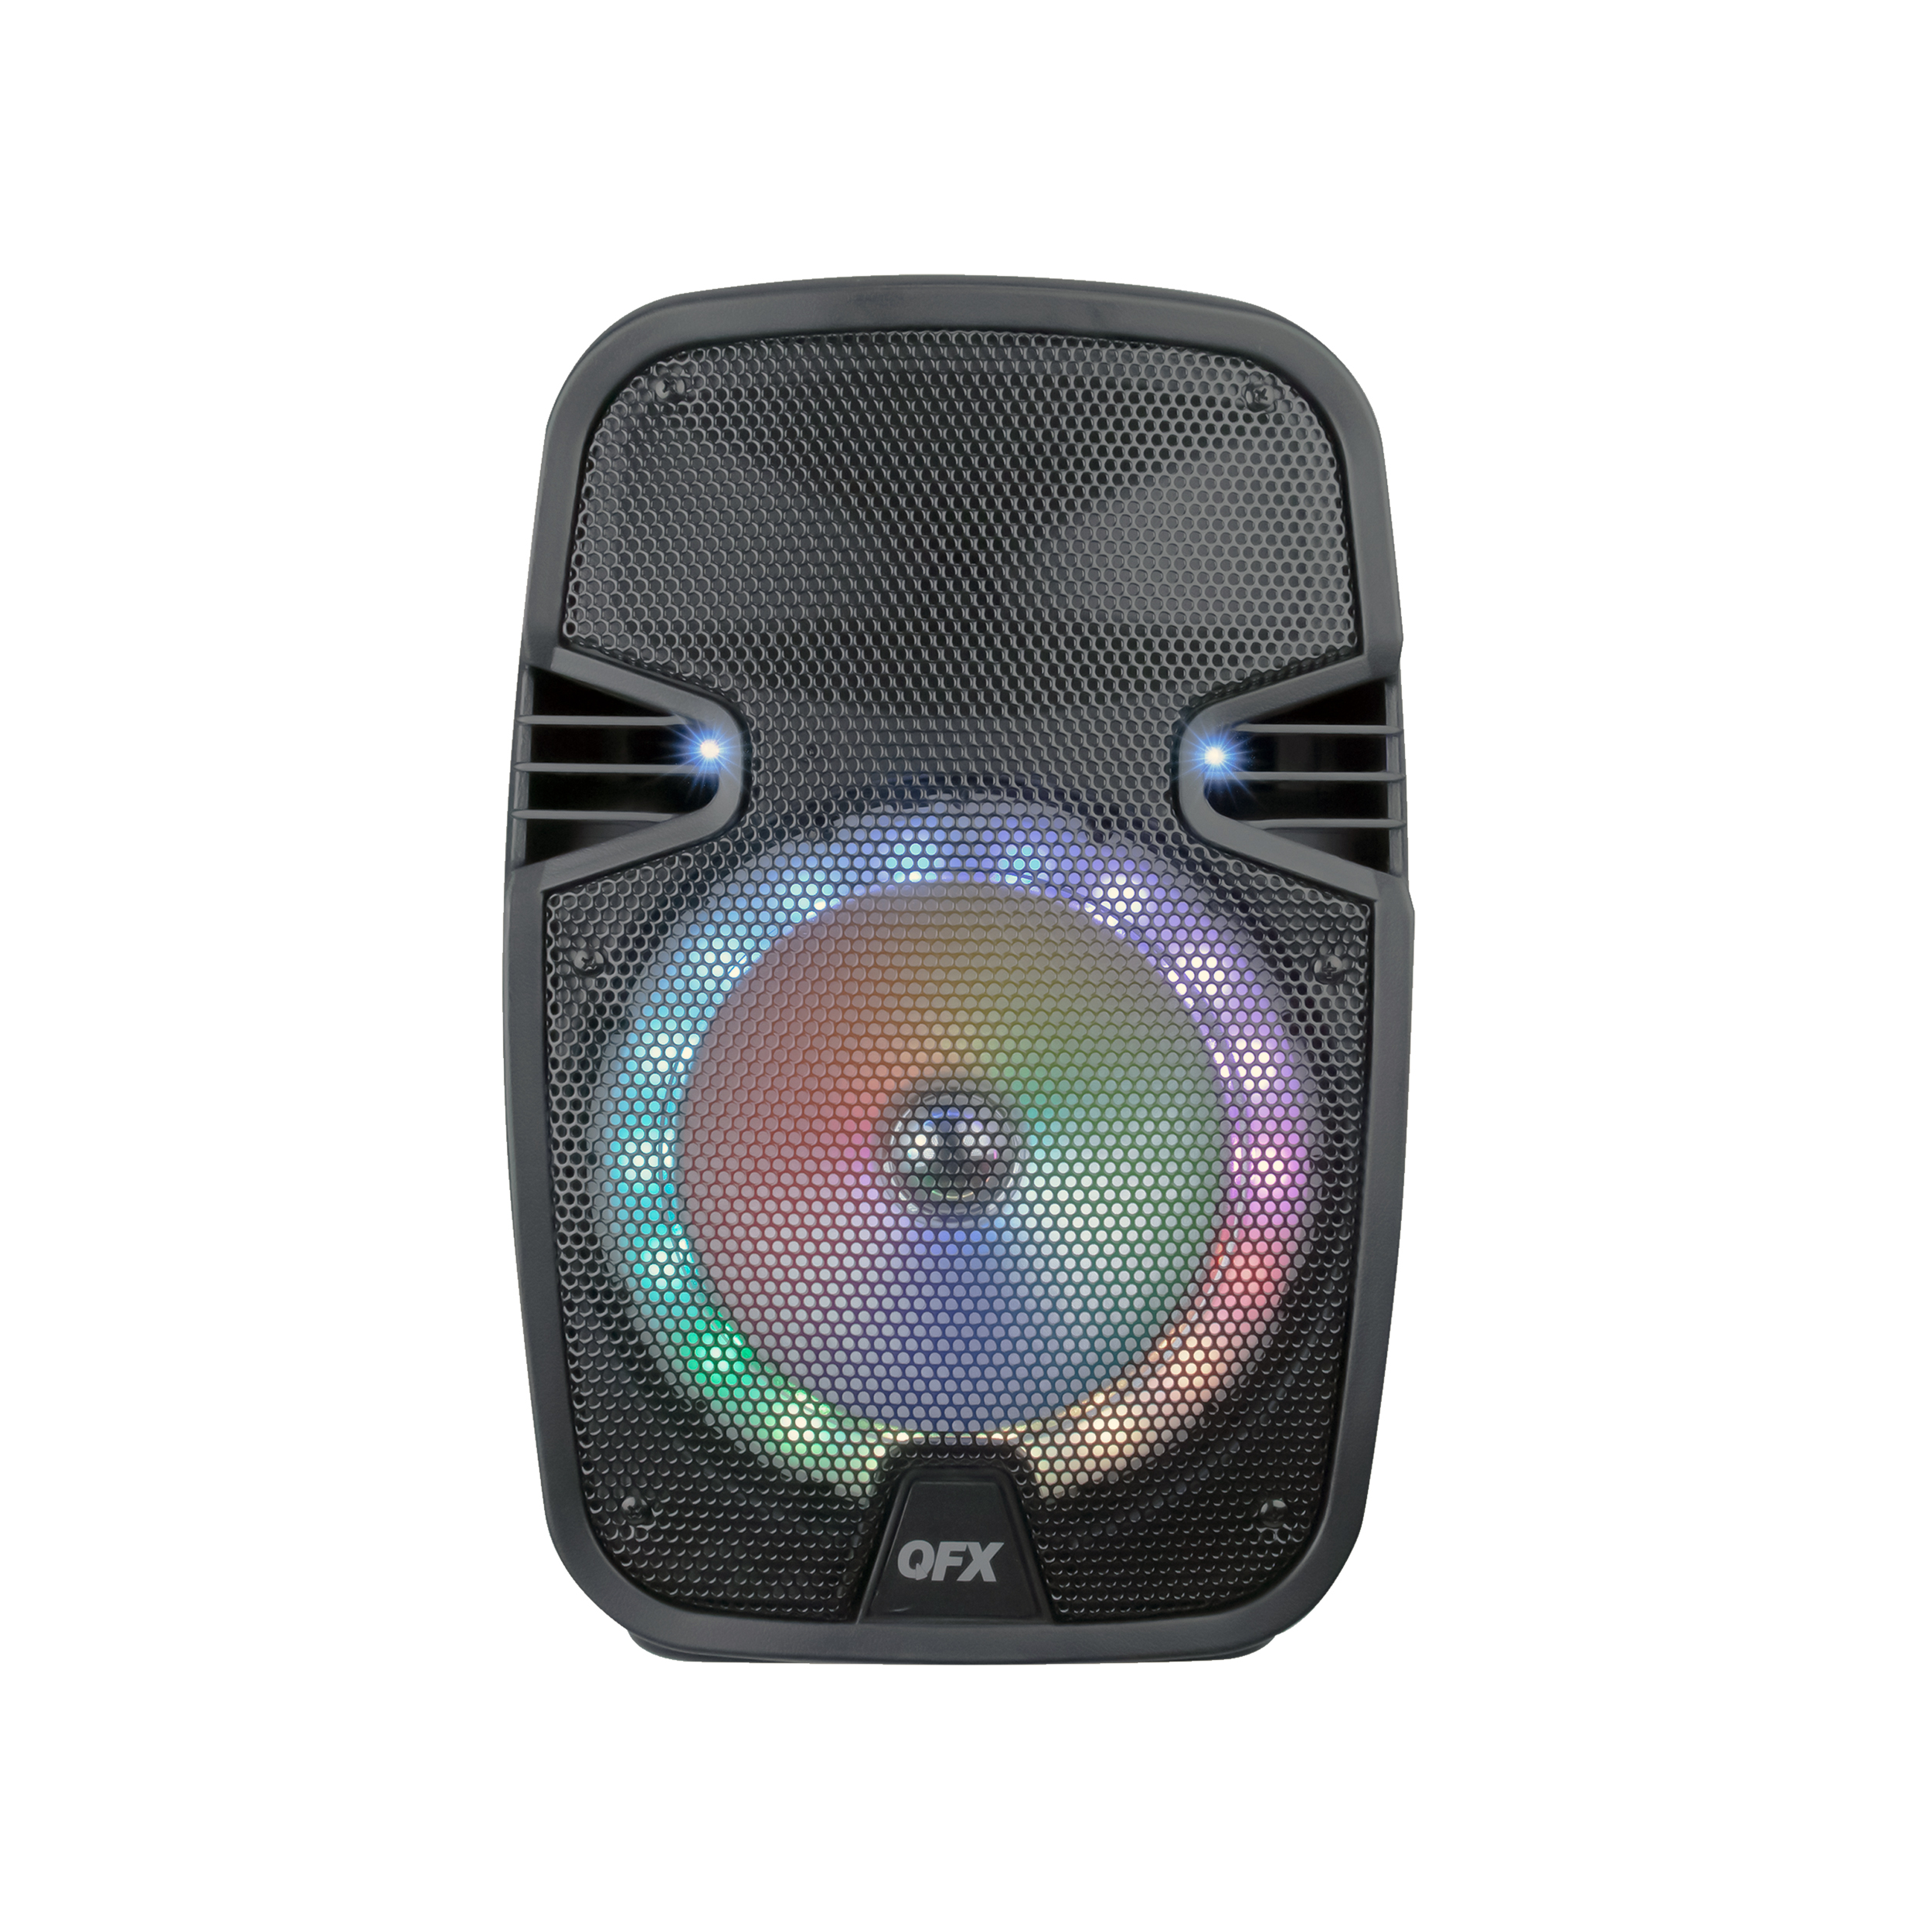 QFX PBX-8074 8-inch, Portable Party Bluetooth Loudspeaker with Microphone & Remote, Black - image 3 of 8